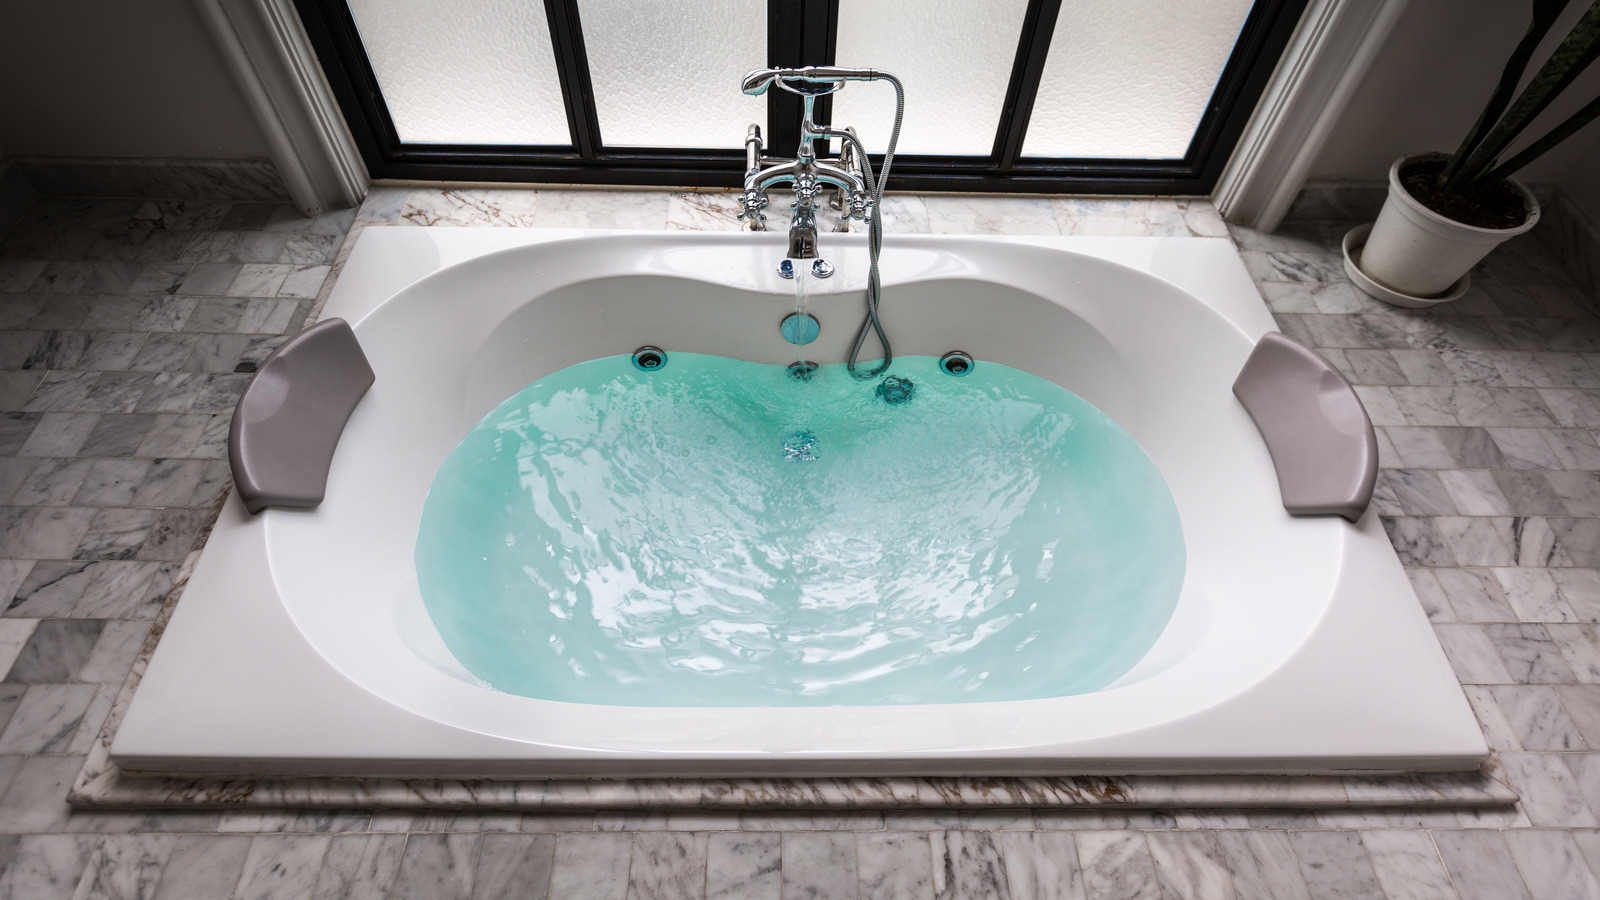 How Much Does A Jacuzzi Bath Remodel Cost?